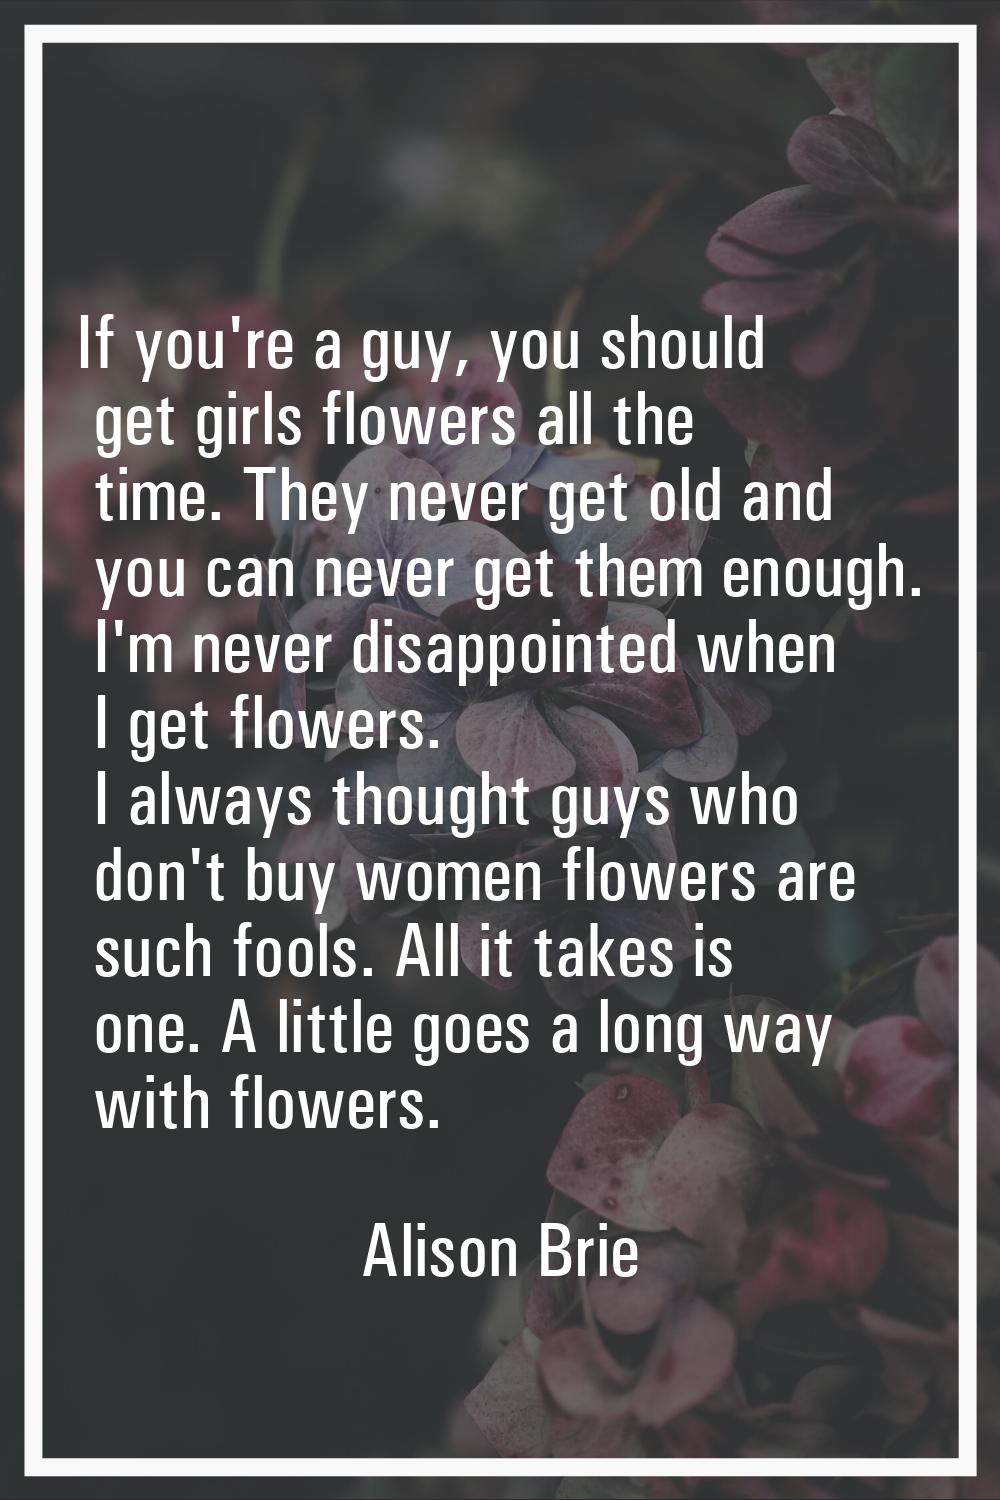 If you're a guy, you should get girls flowers all the time. They never get old and you can never ge